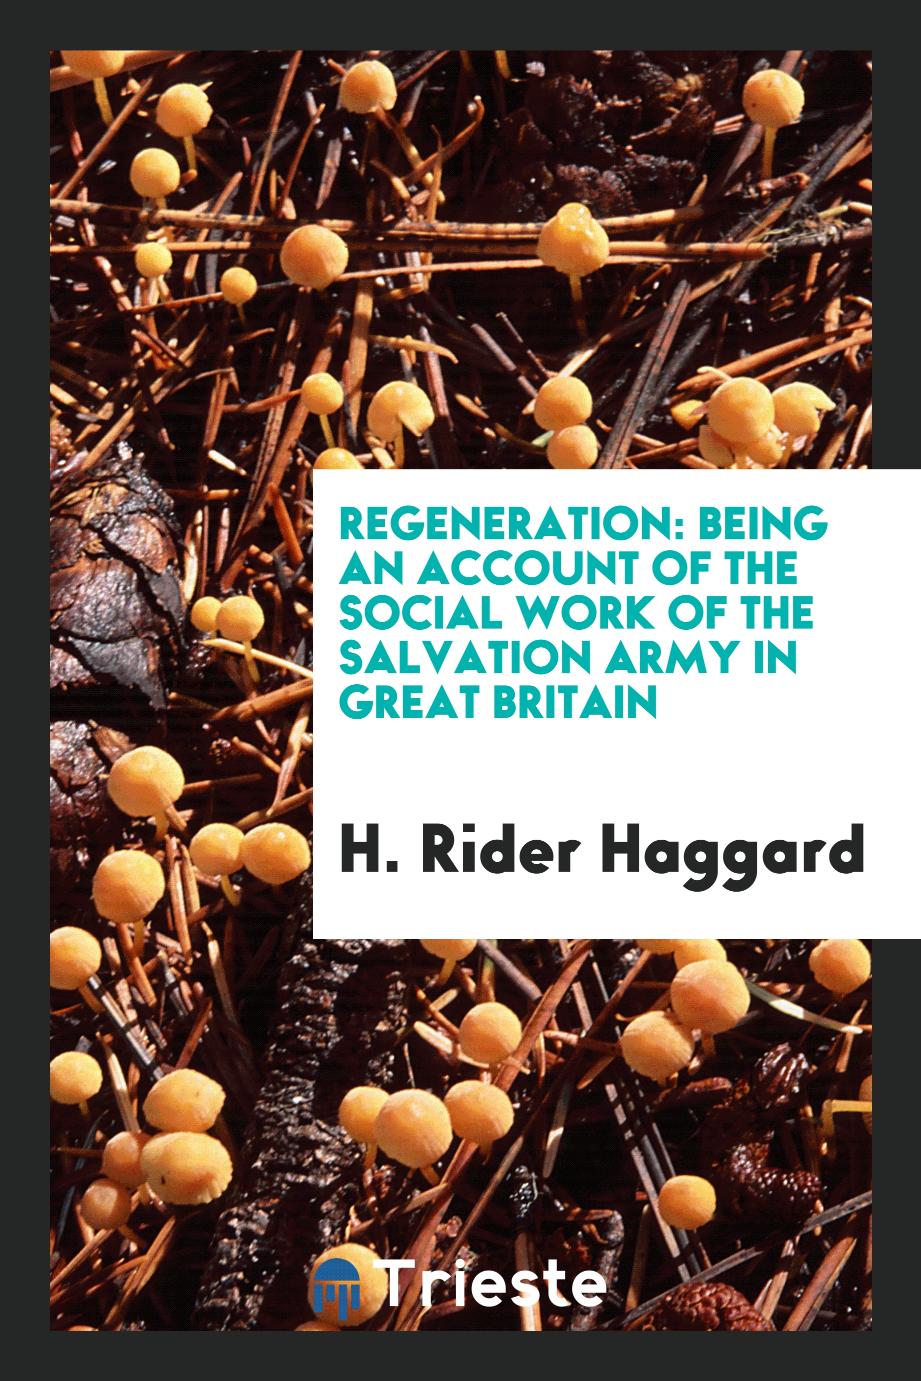 Regeneration: being an account of the social work of the Salvation army in Great Britain